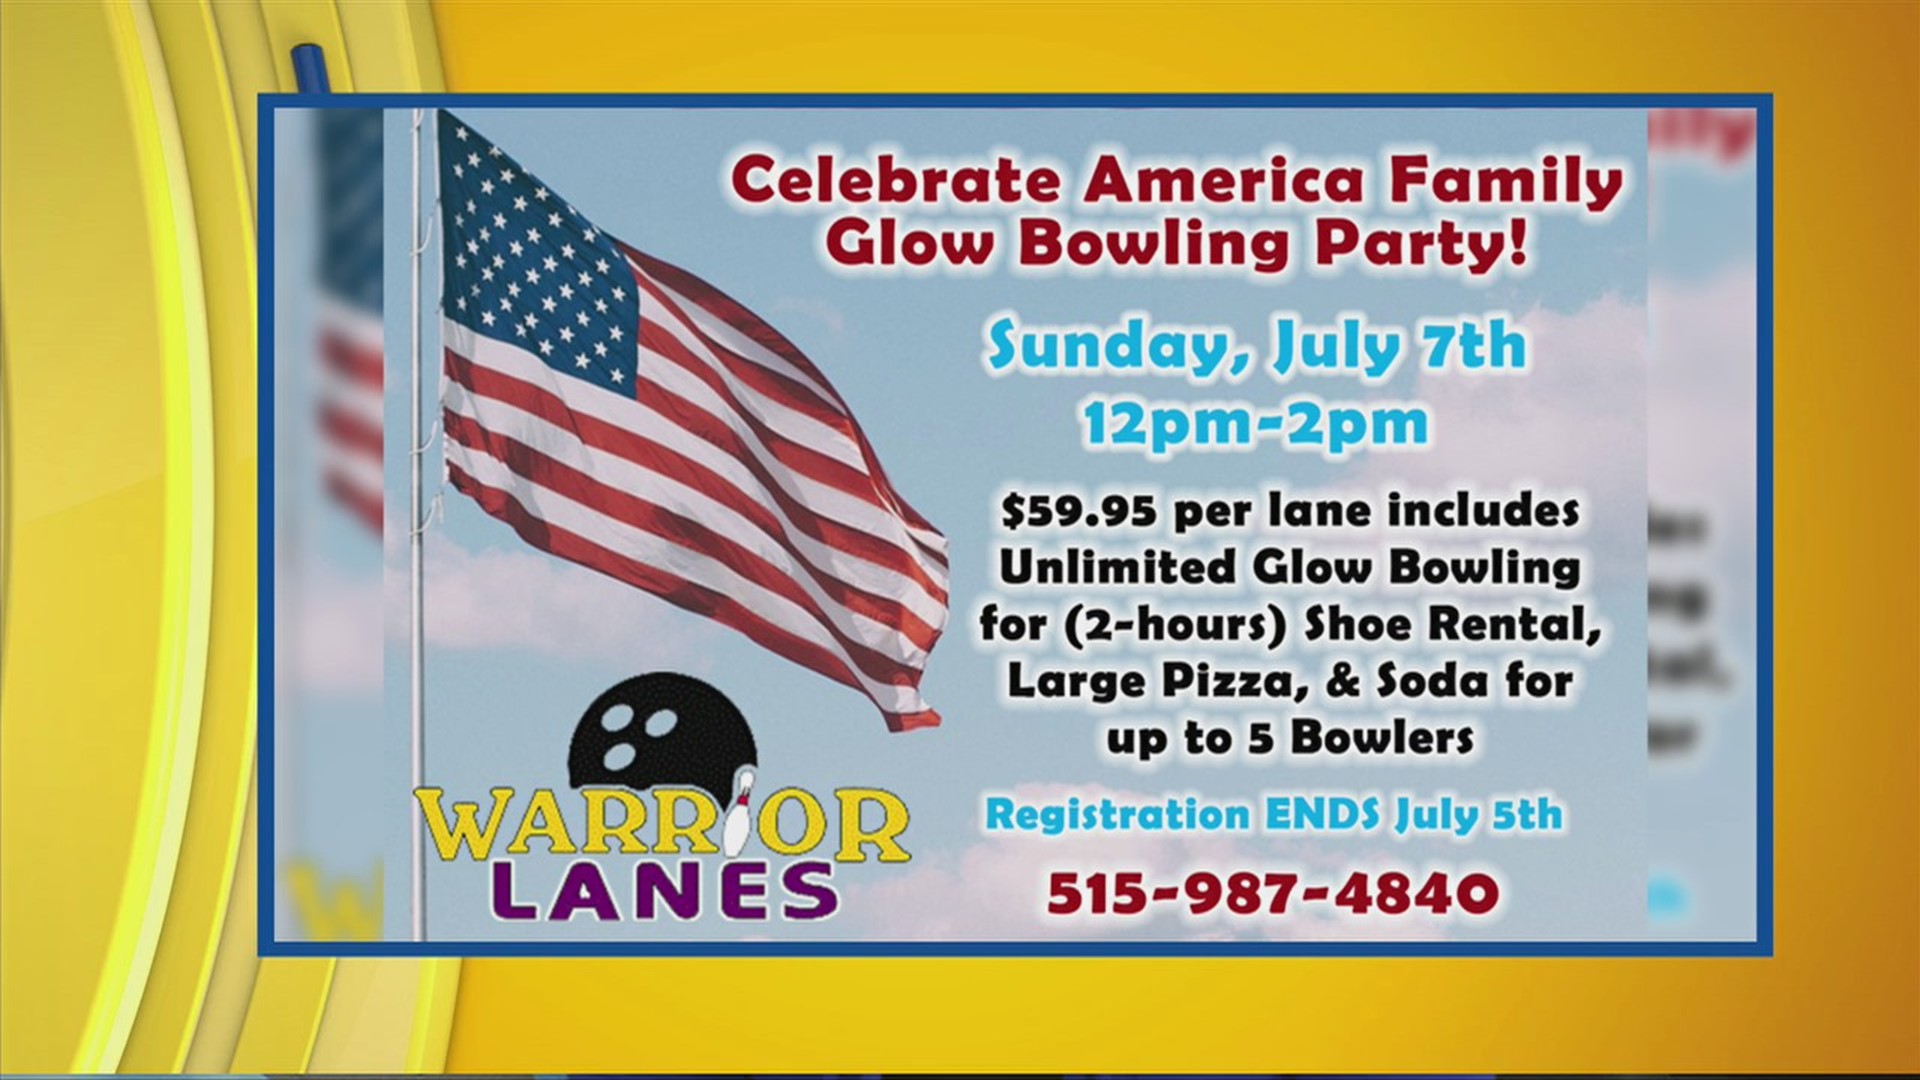 Warrior Lanes - Celebrate America Bowling Party